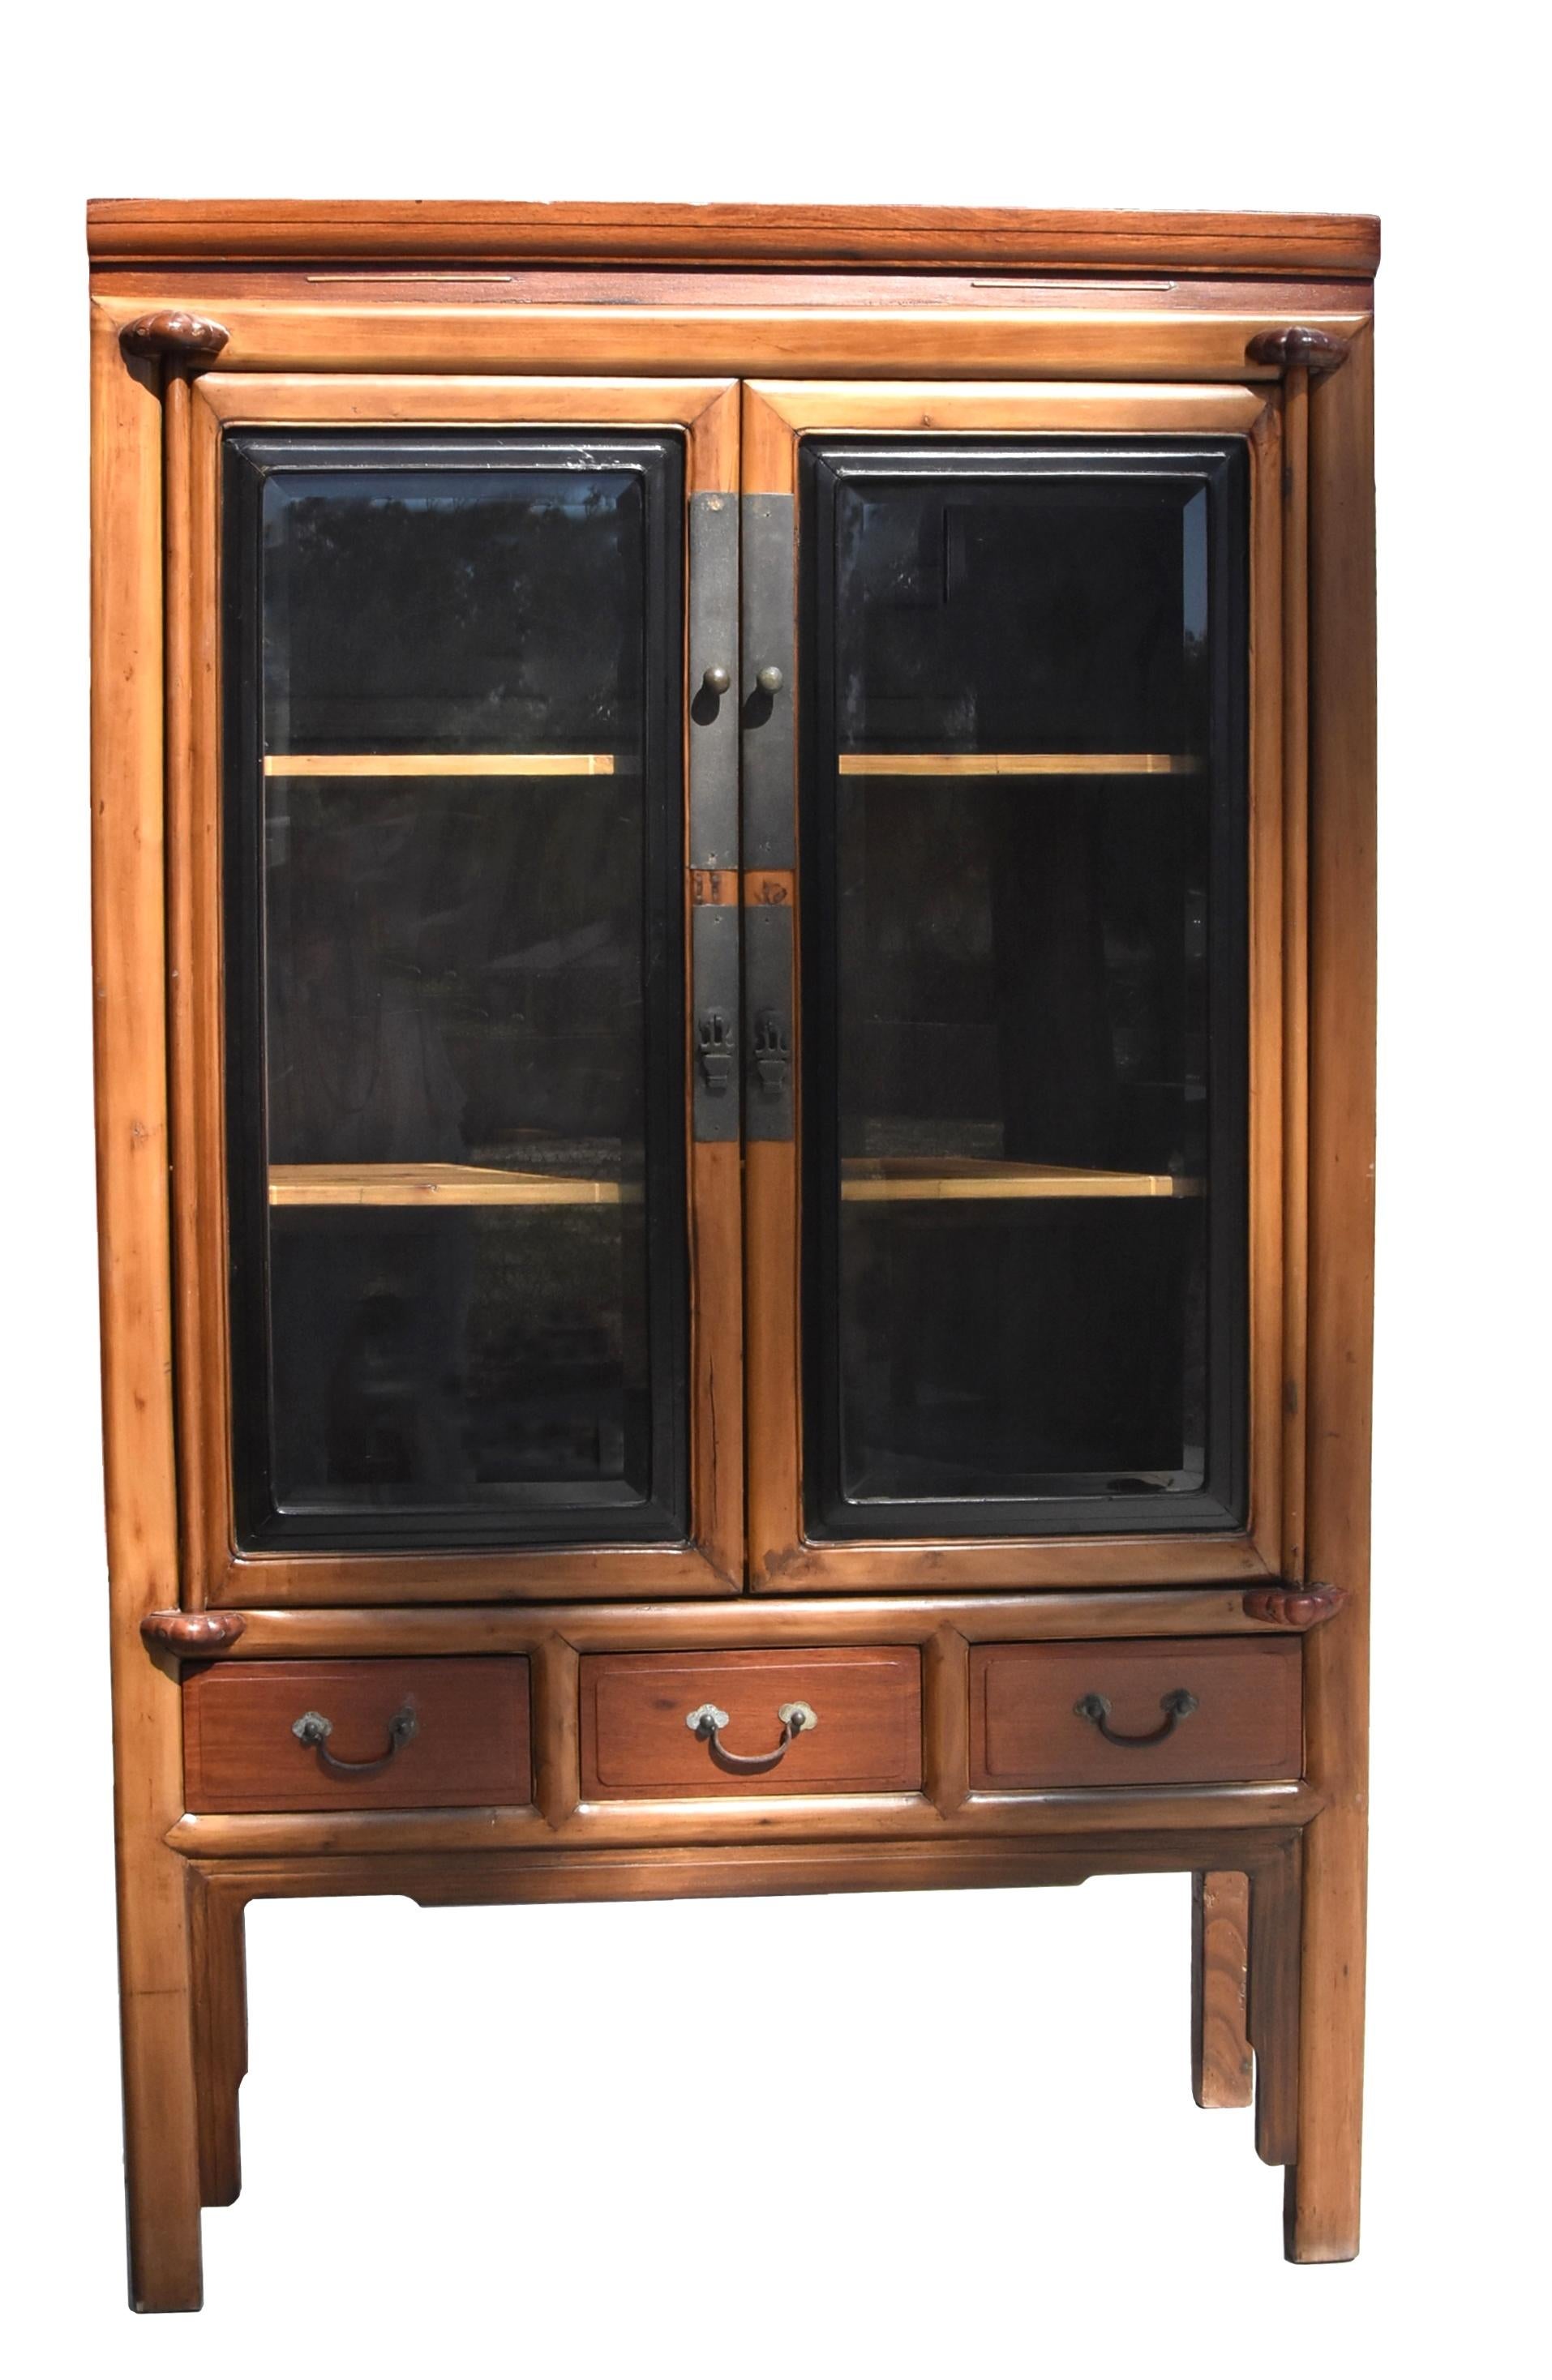 A late 19th century solid wood Chinese scholar's cabinet with glass doors and removable shelves. The glass doors with elegant black lacquered frames are mounted on dowels adorned with carved lotus. Above the doors a waist below the top facade